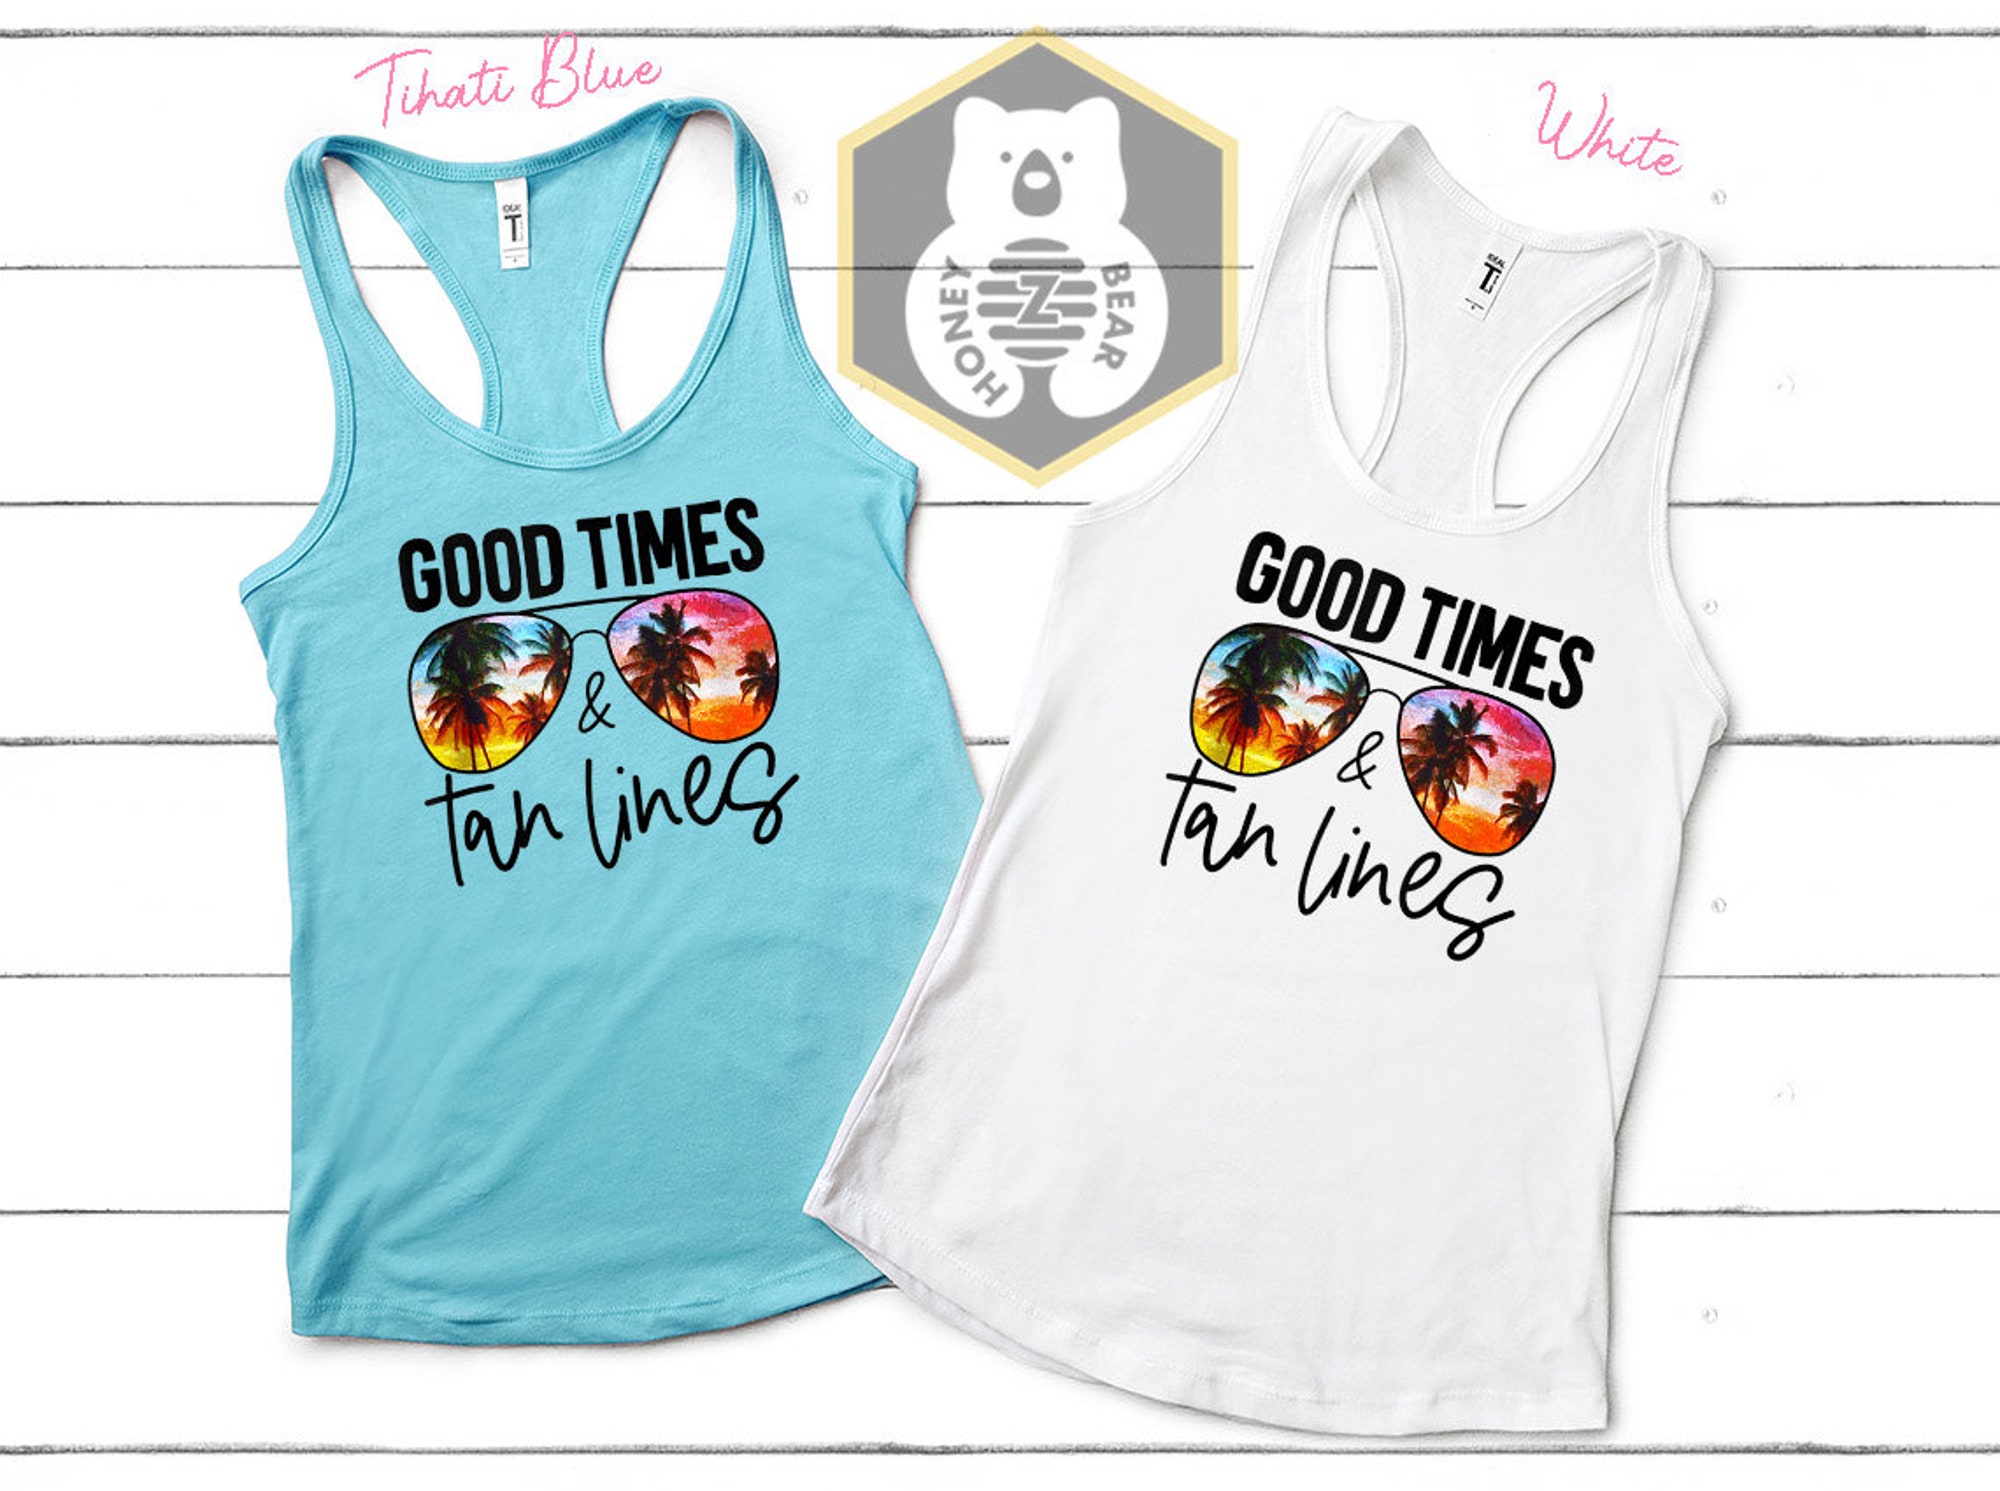 Discover Good Times Tan Lines Tank Top